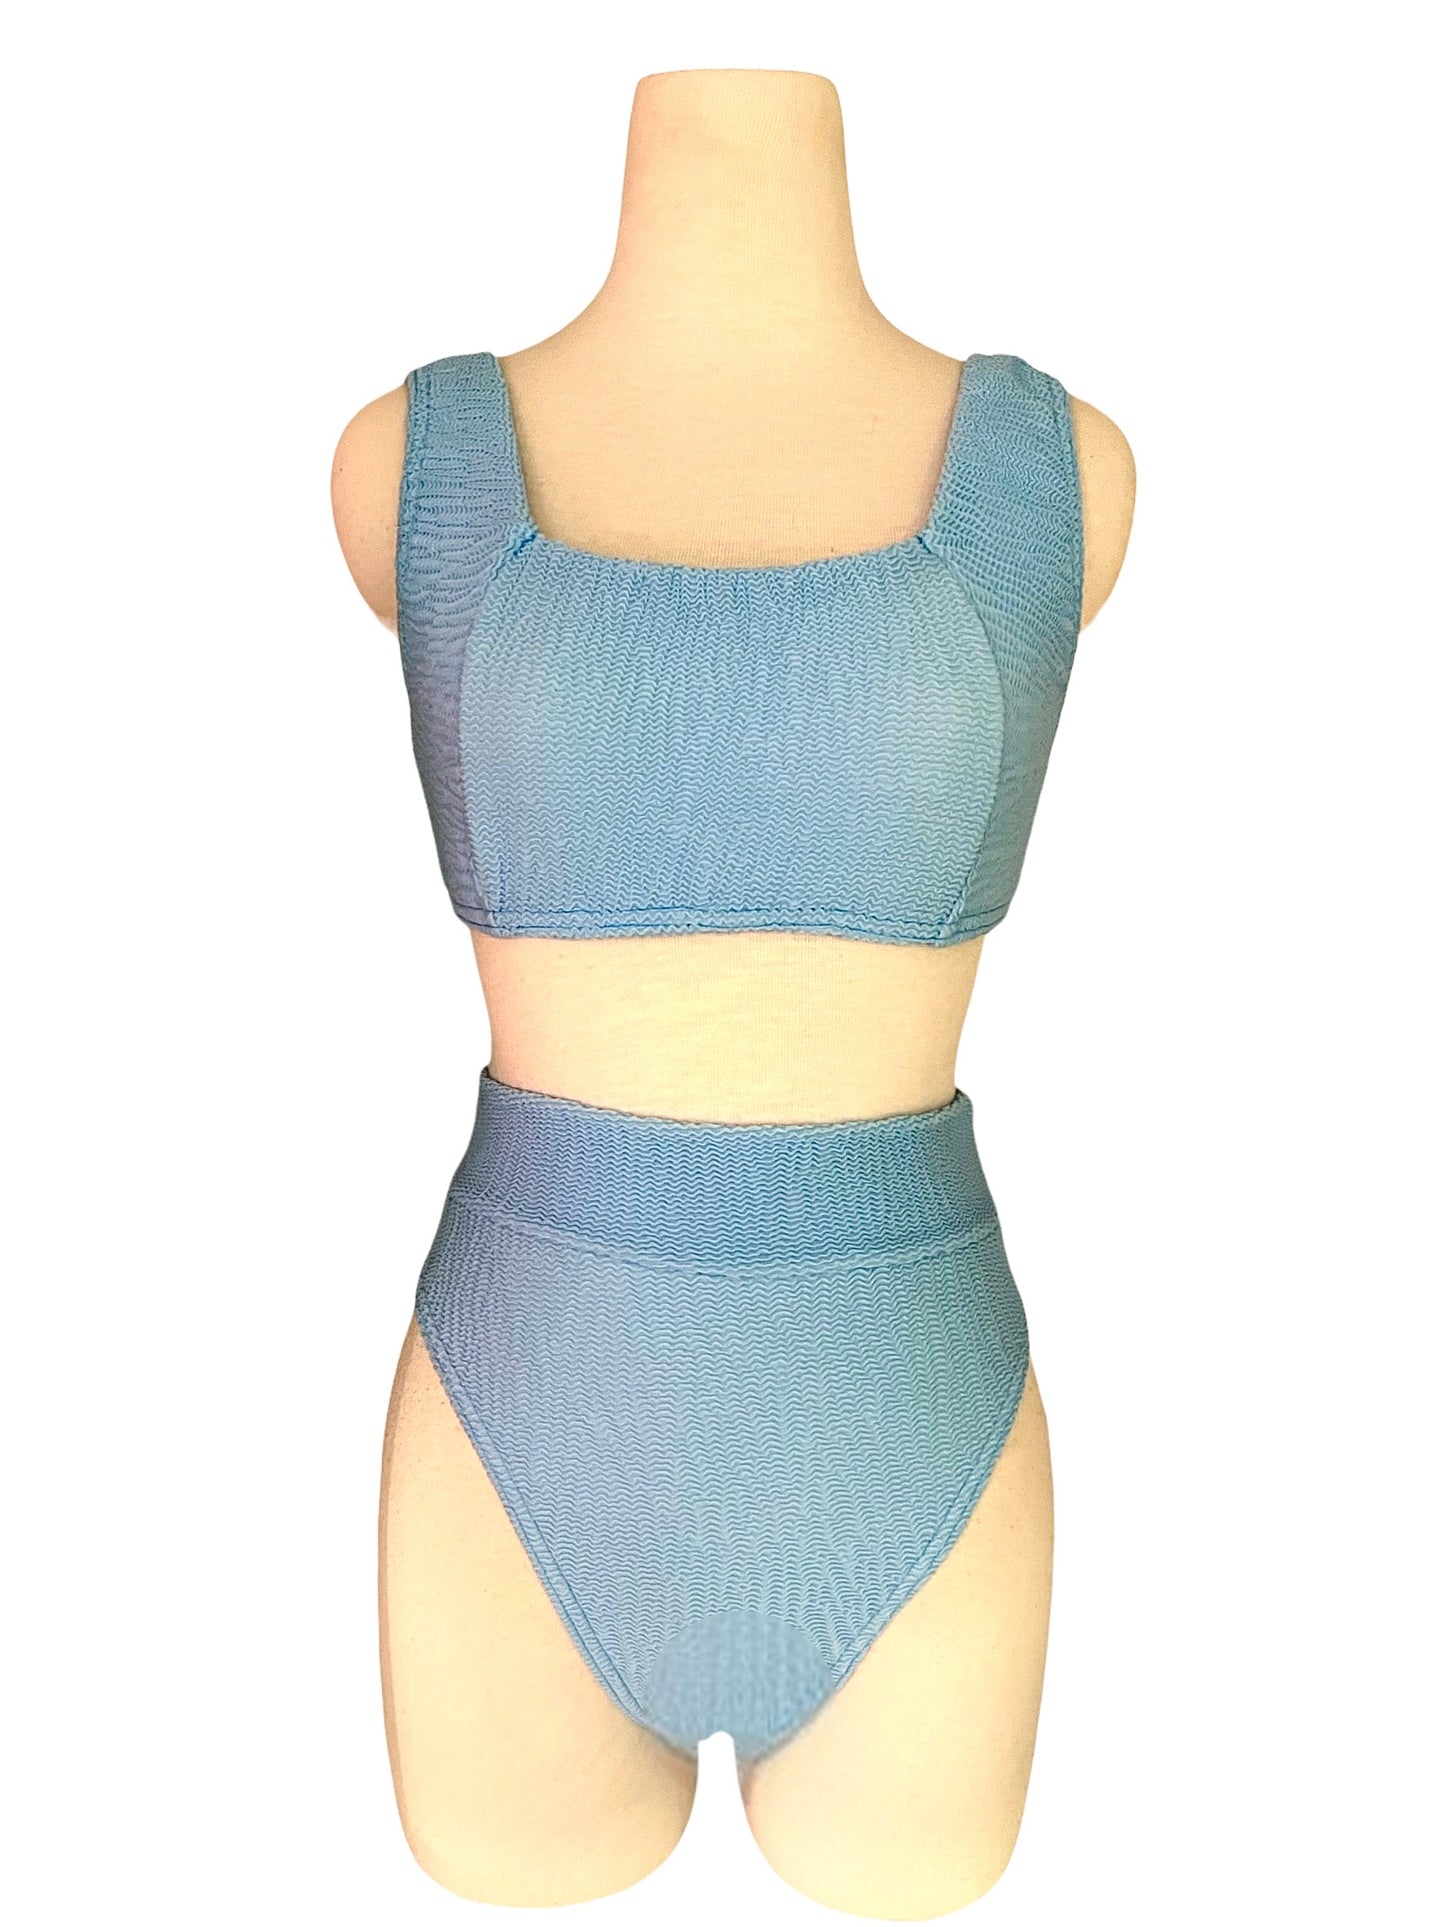 LIGHT BLUE Square neck tie tank top with high cut waistband bottom